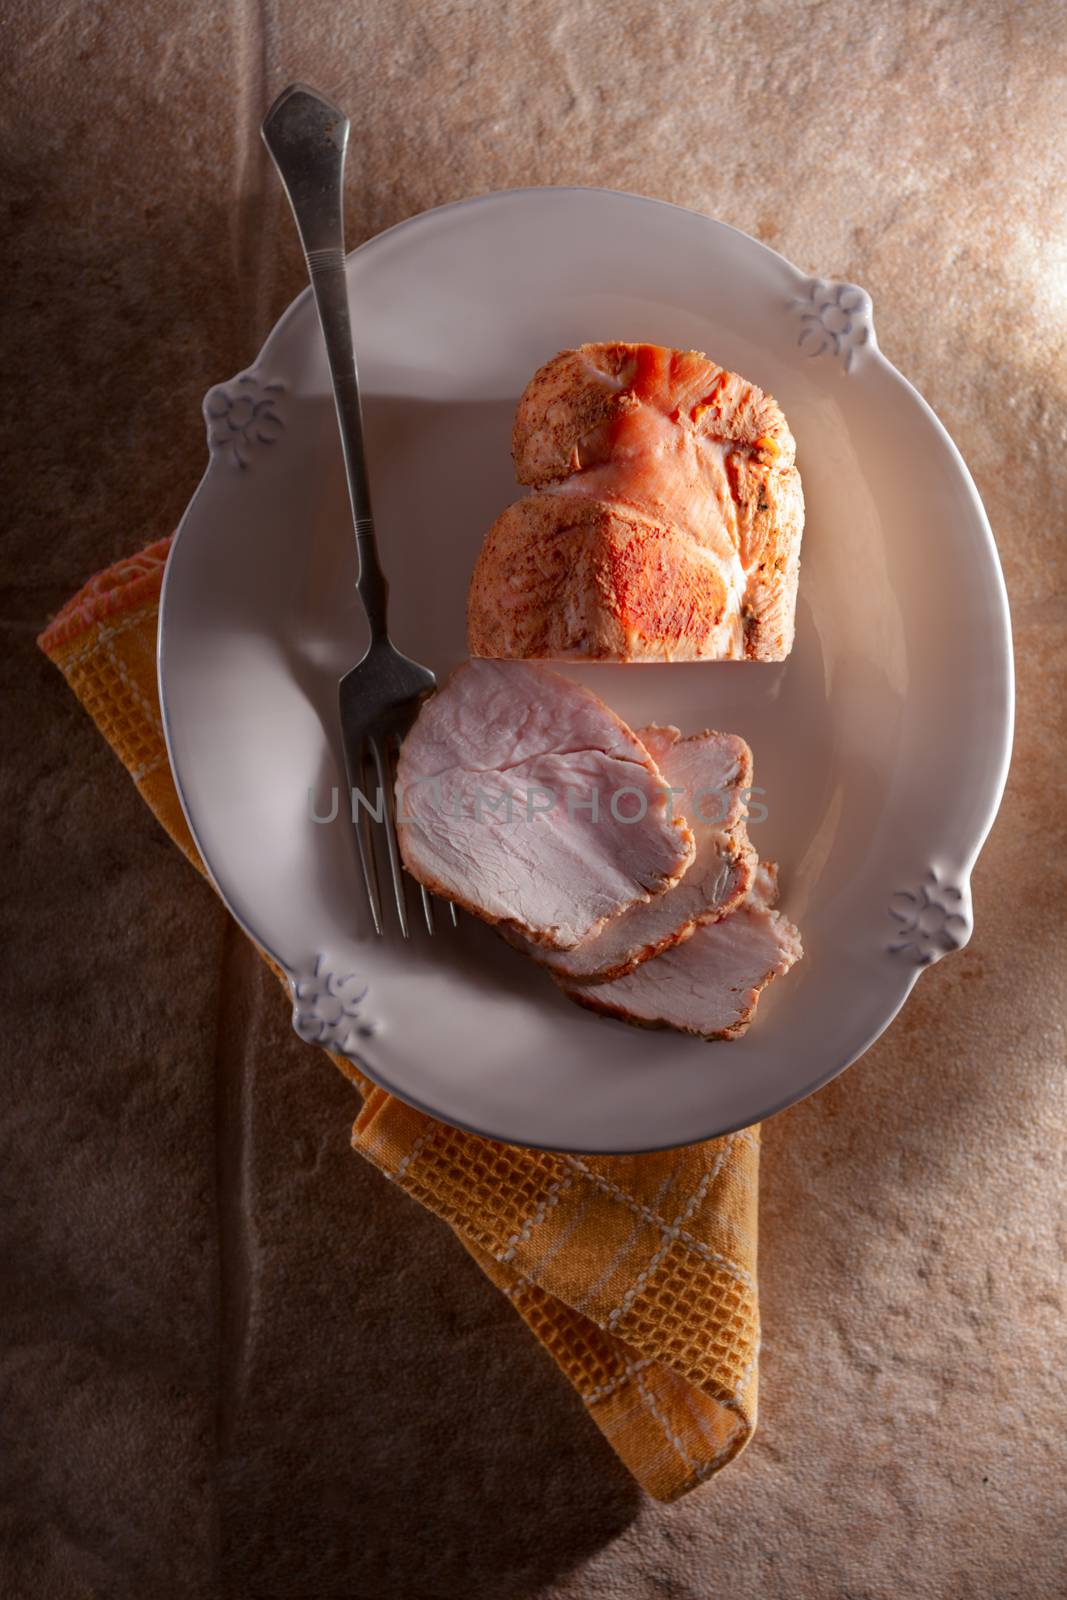 Pastrami of turkey breast by supercat67